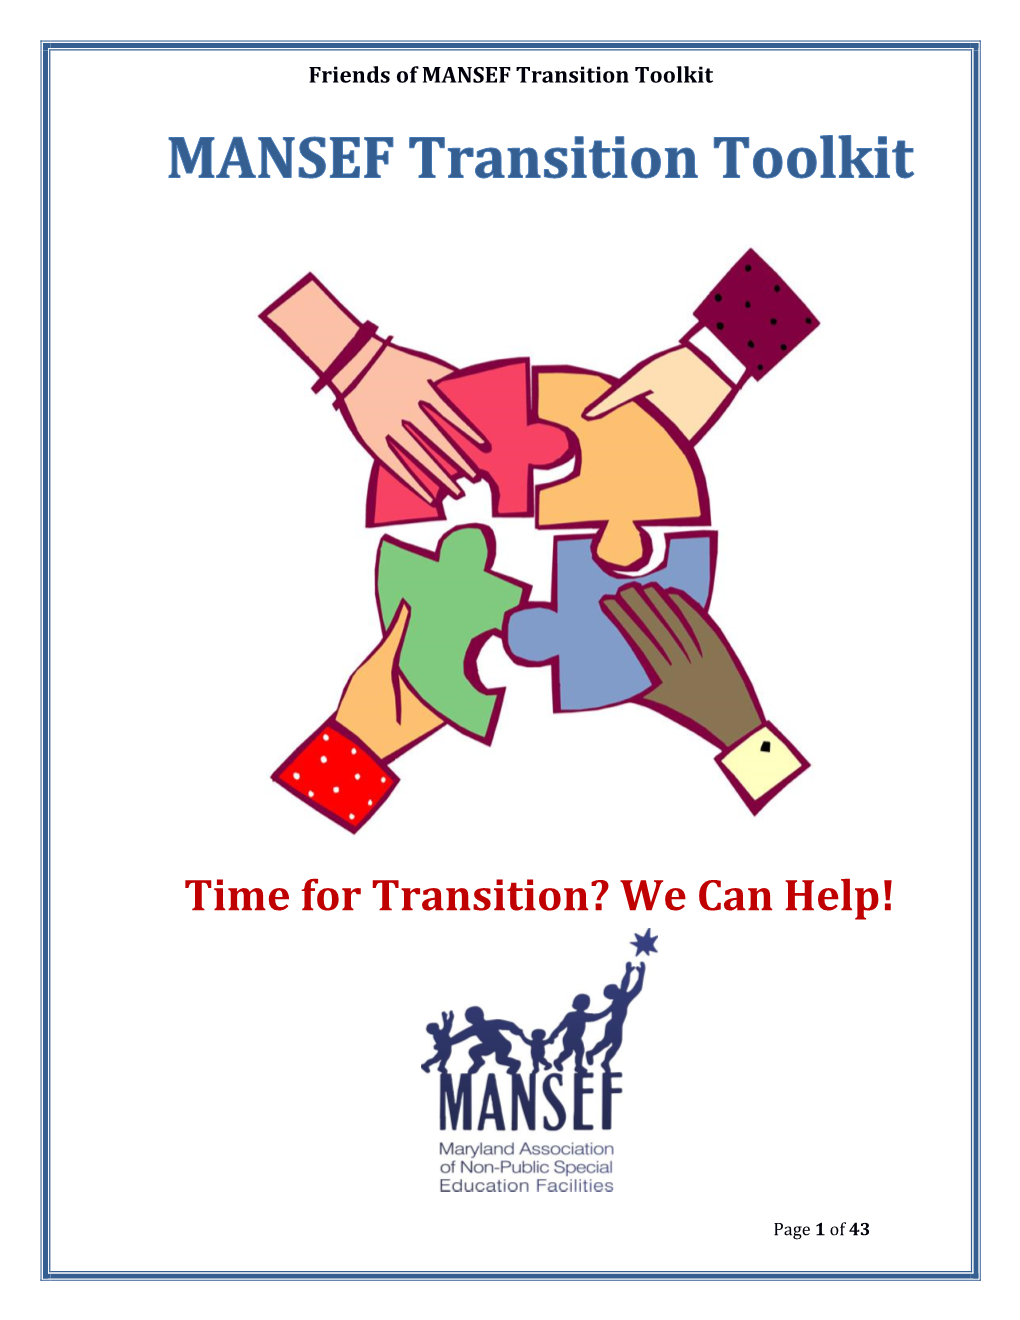 Time for Transition? We Can Help!